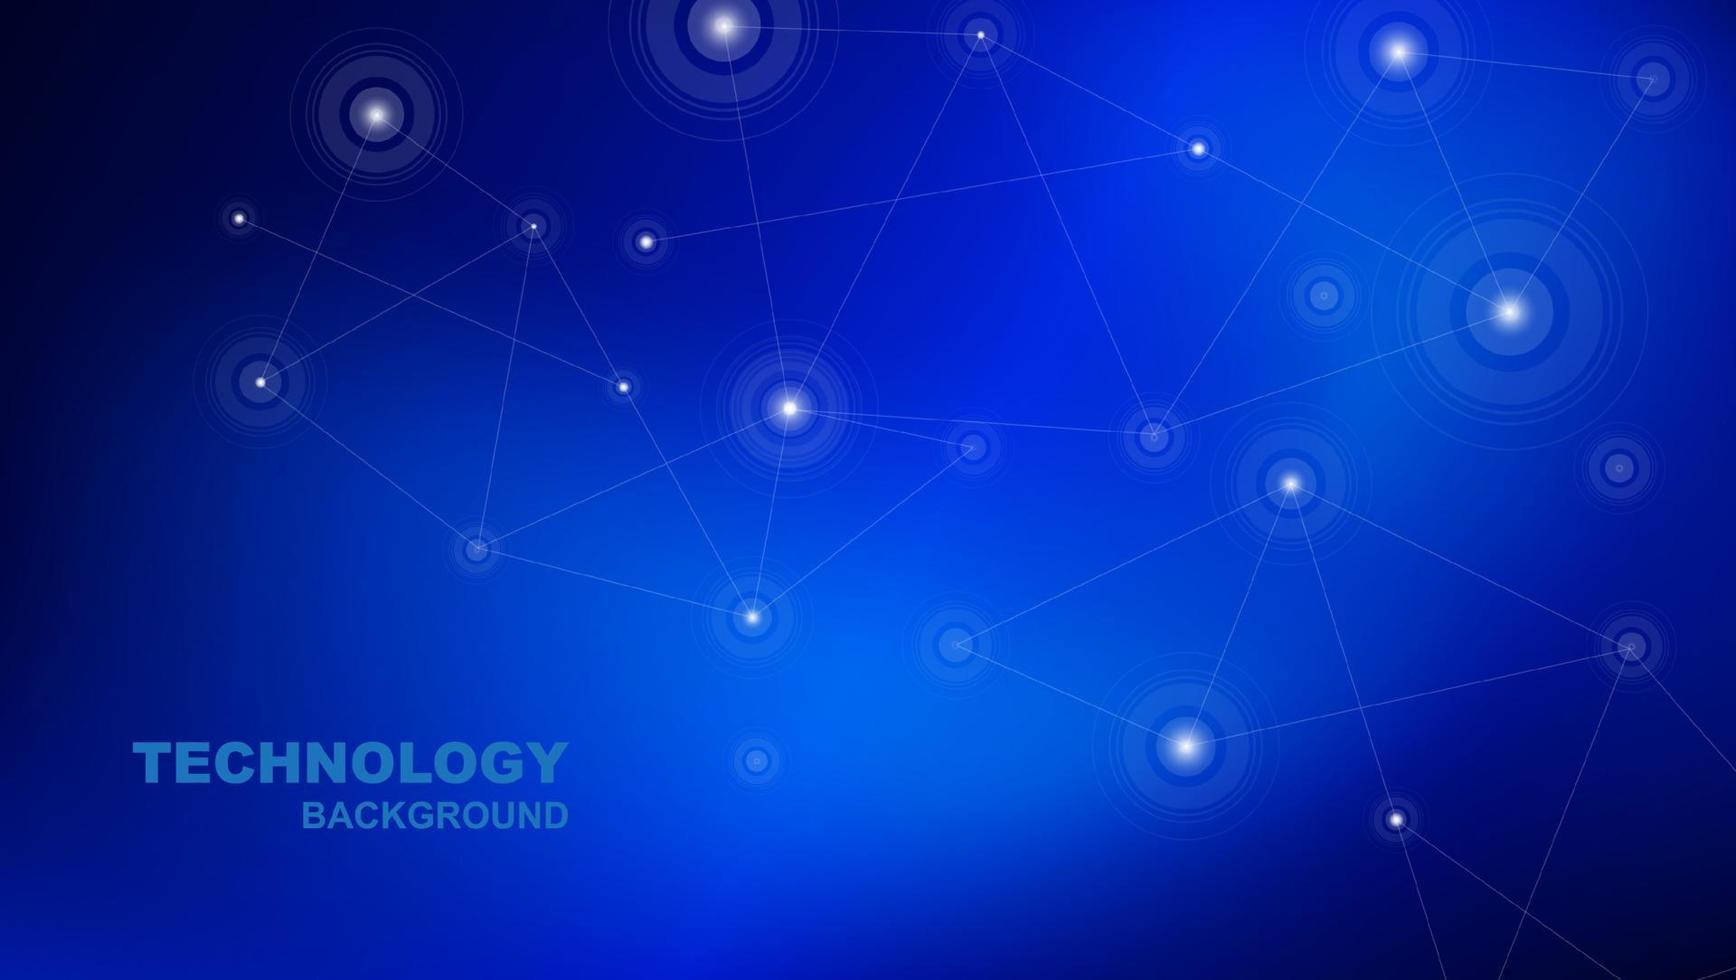 Digital technology background with line mesh vector